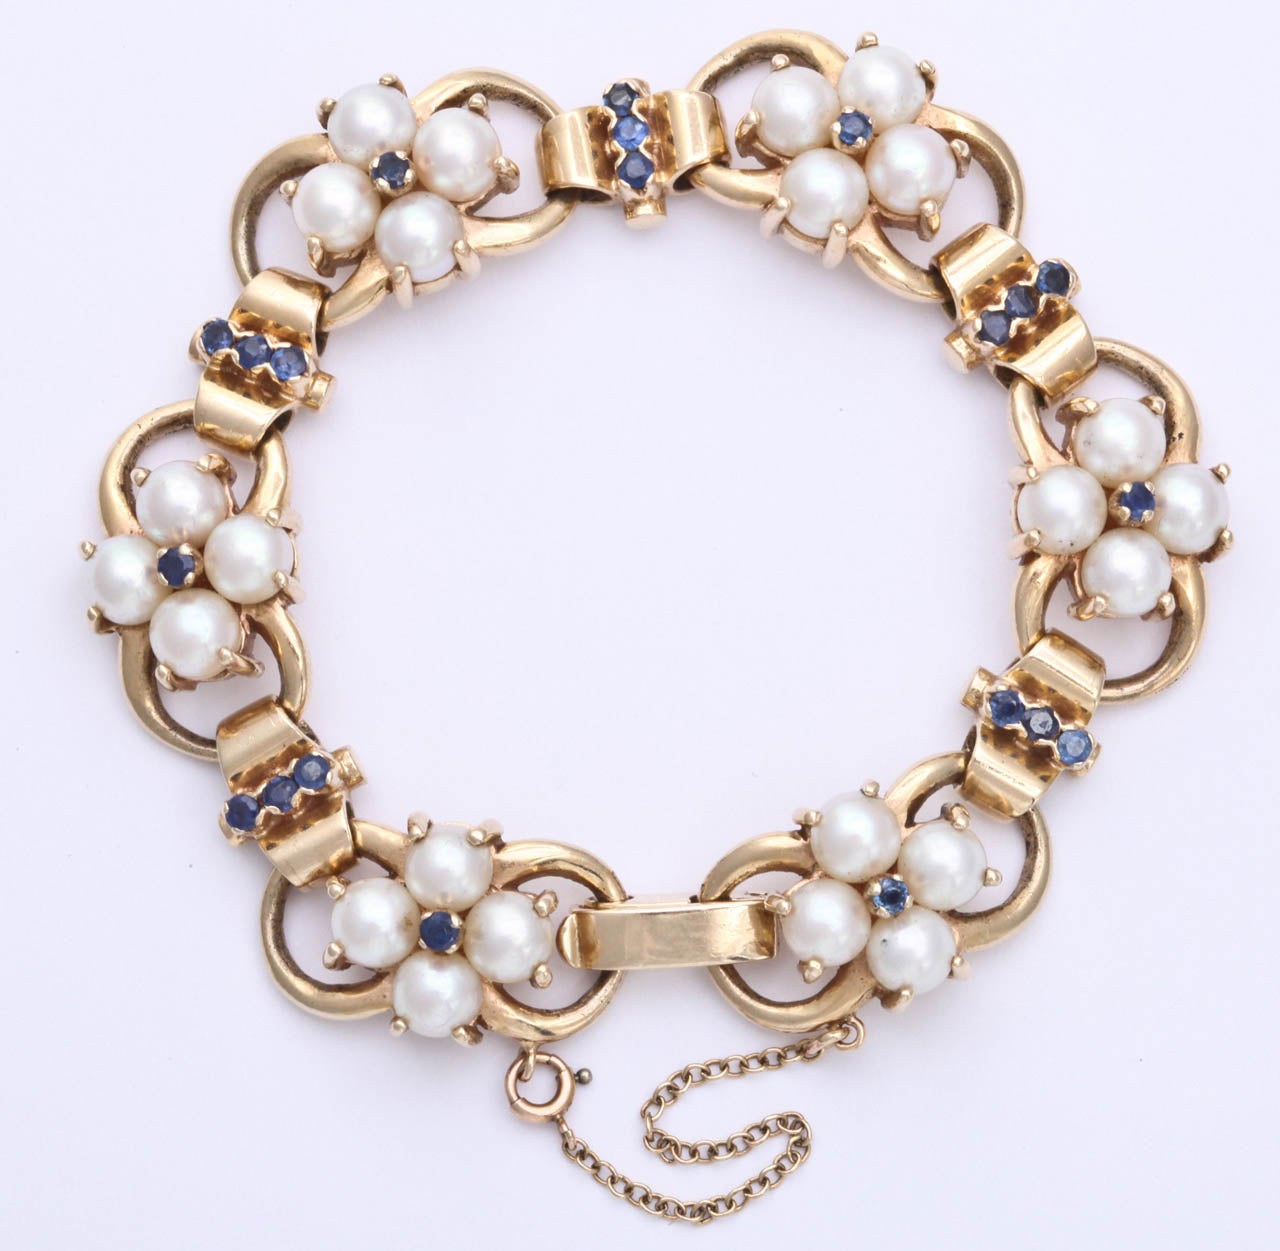 14kt yellow gold open link flexible bracelet embellished with 24 (4mm) cultured pearls and 21 Ceylon faceted beautiful color sapphires. Signed by Tiffany & Co. 